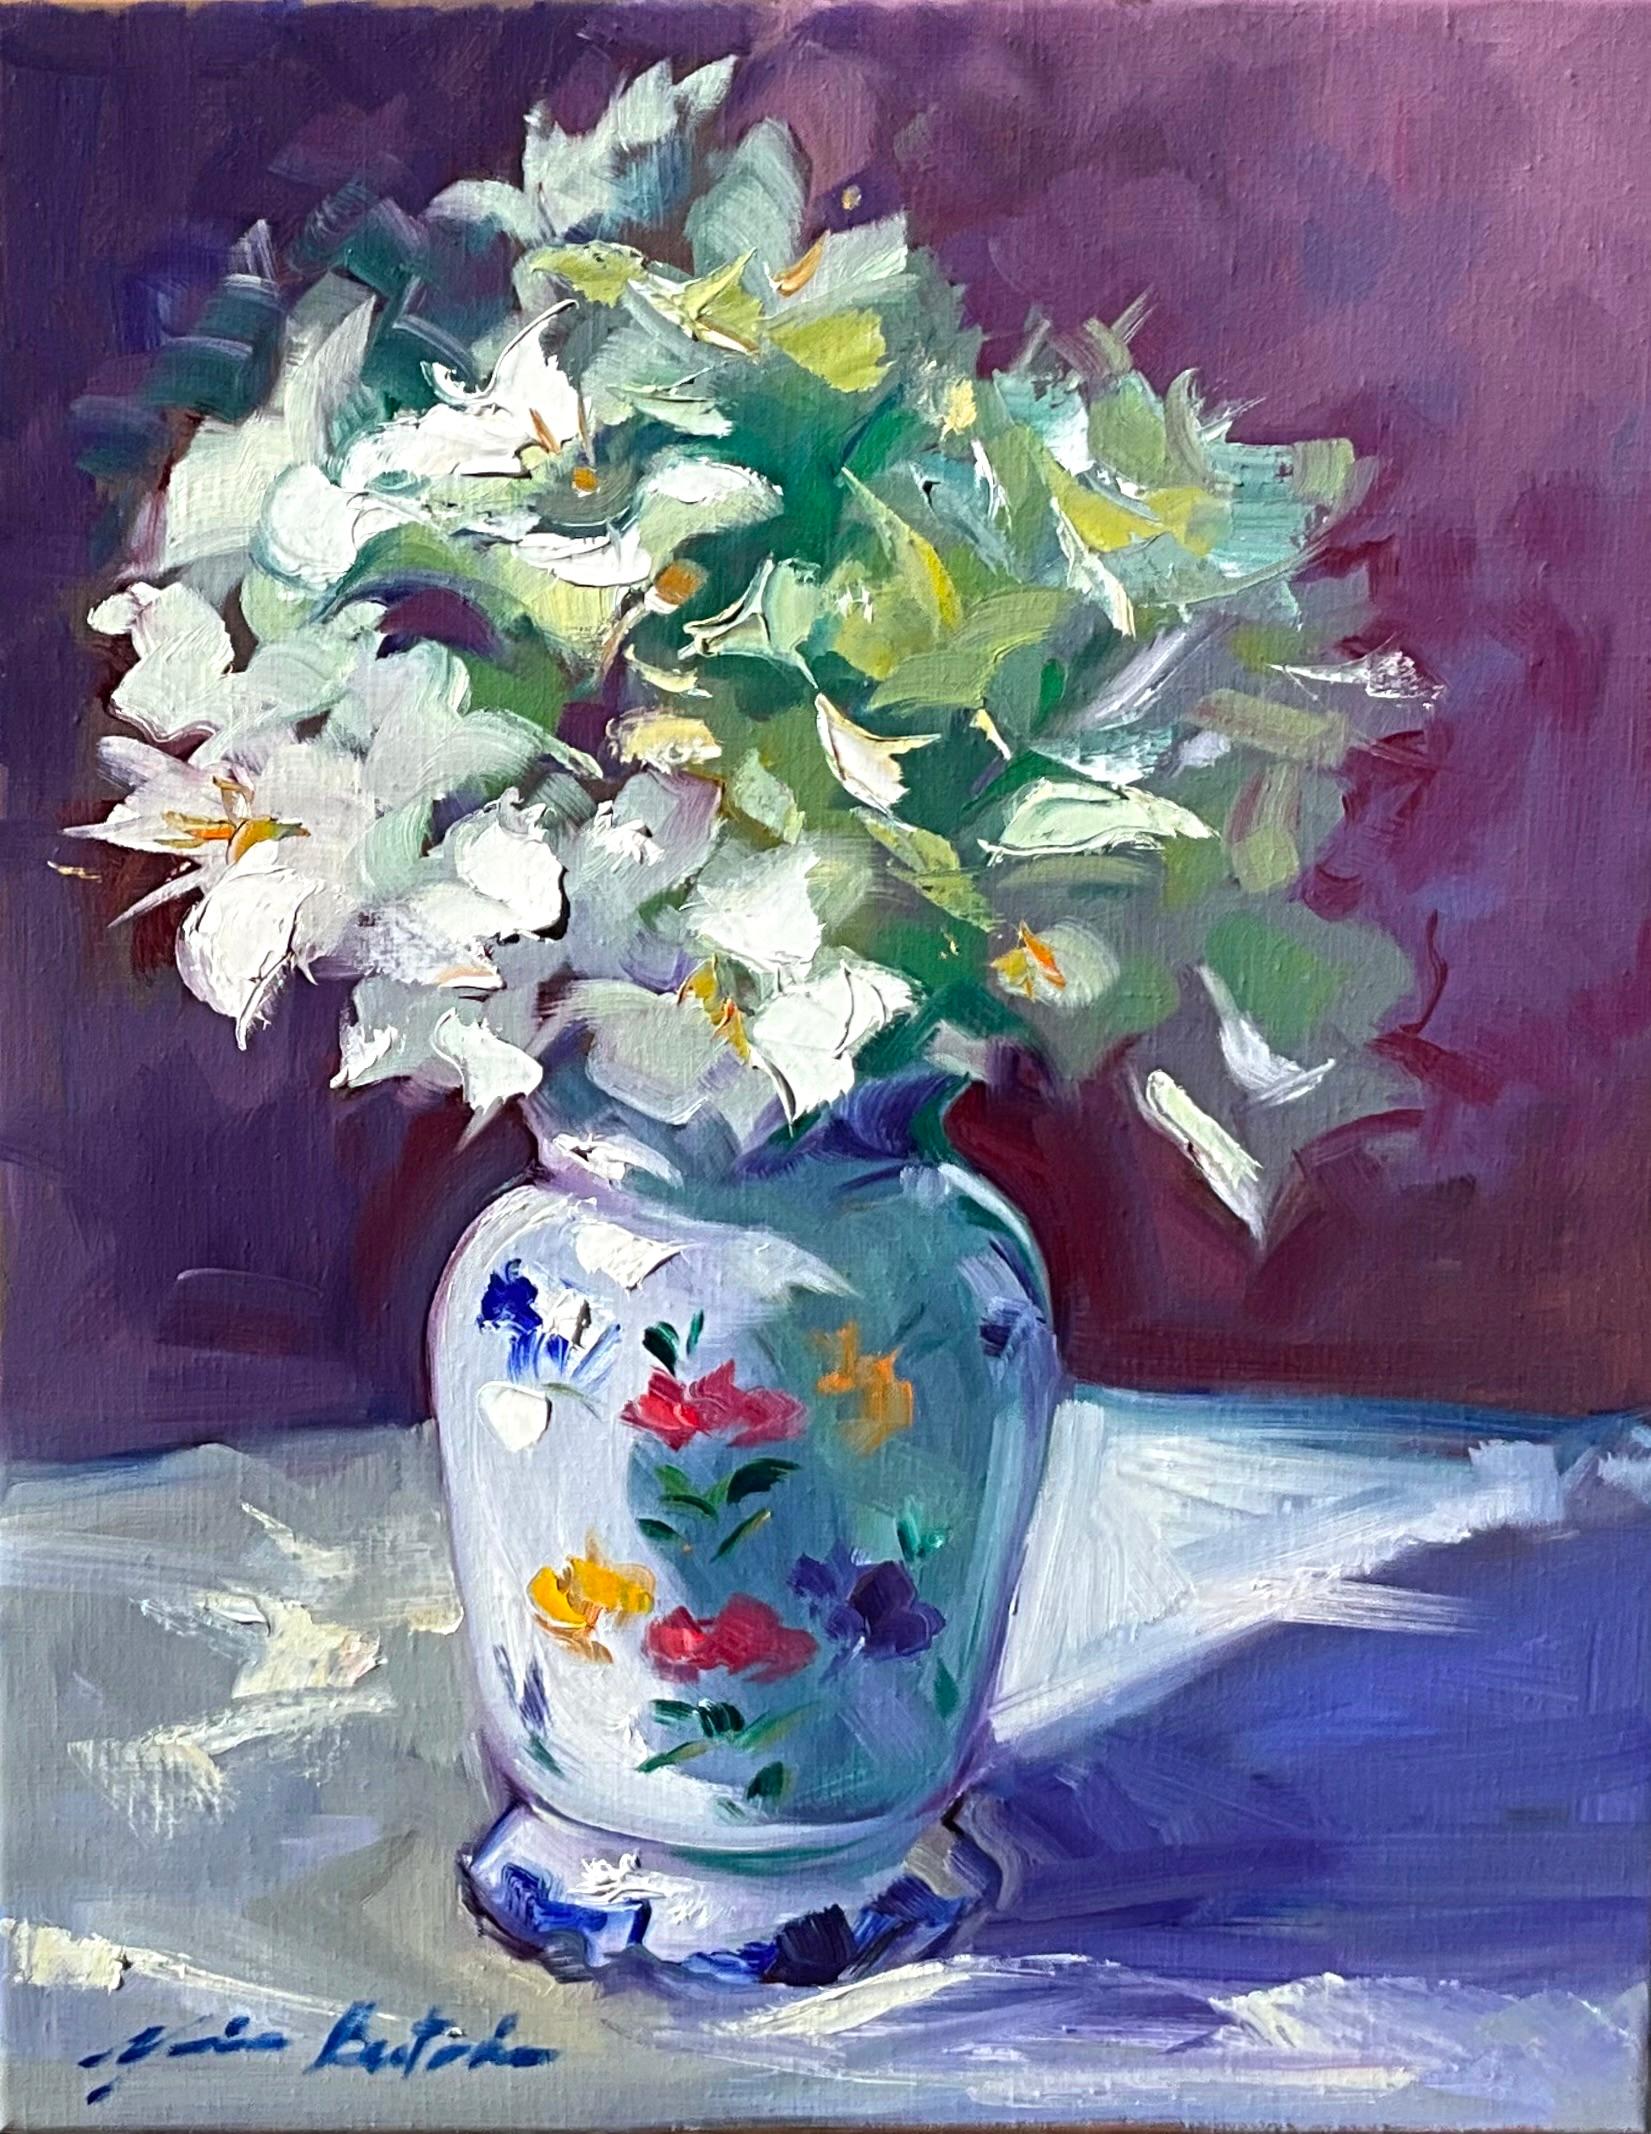 Maria Bertrán Still-Life Painting - "Vase With White Tulips" Contemporary Impressionist Still Life Oil